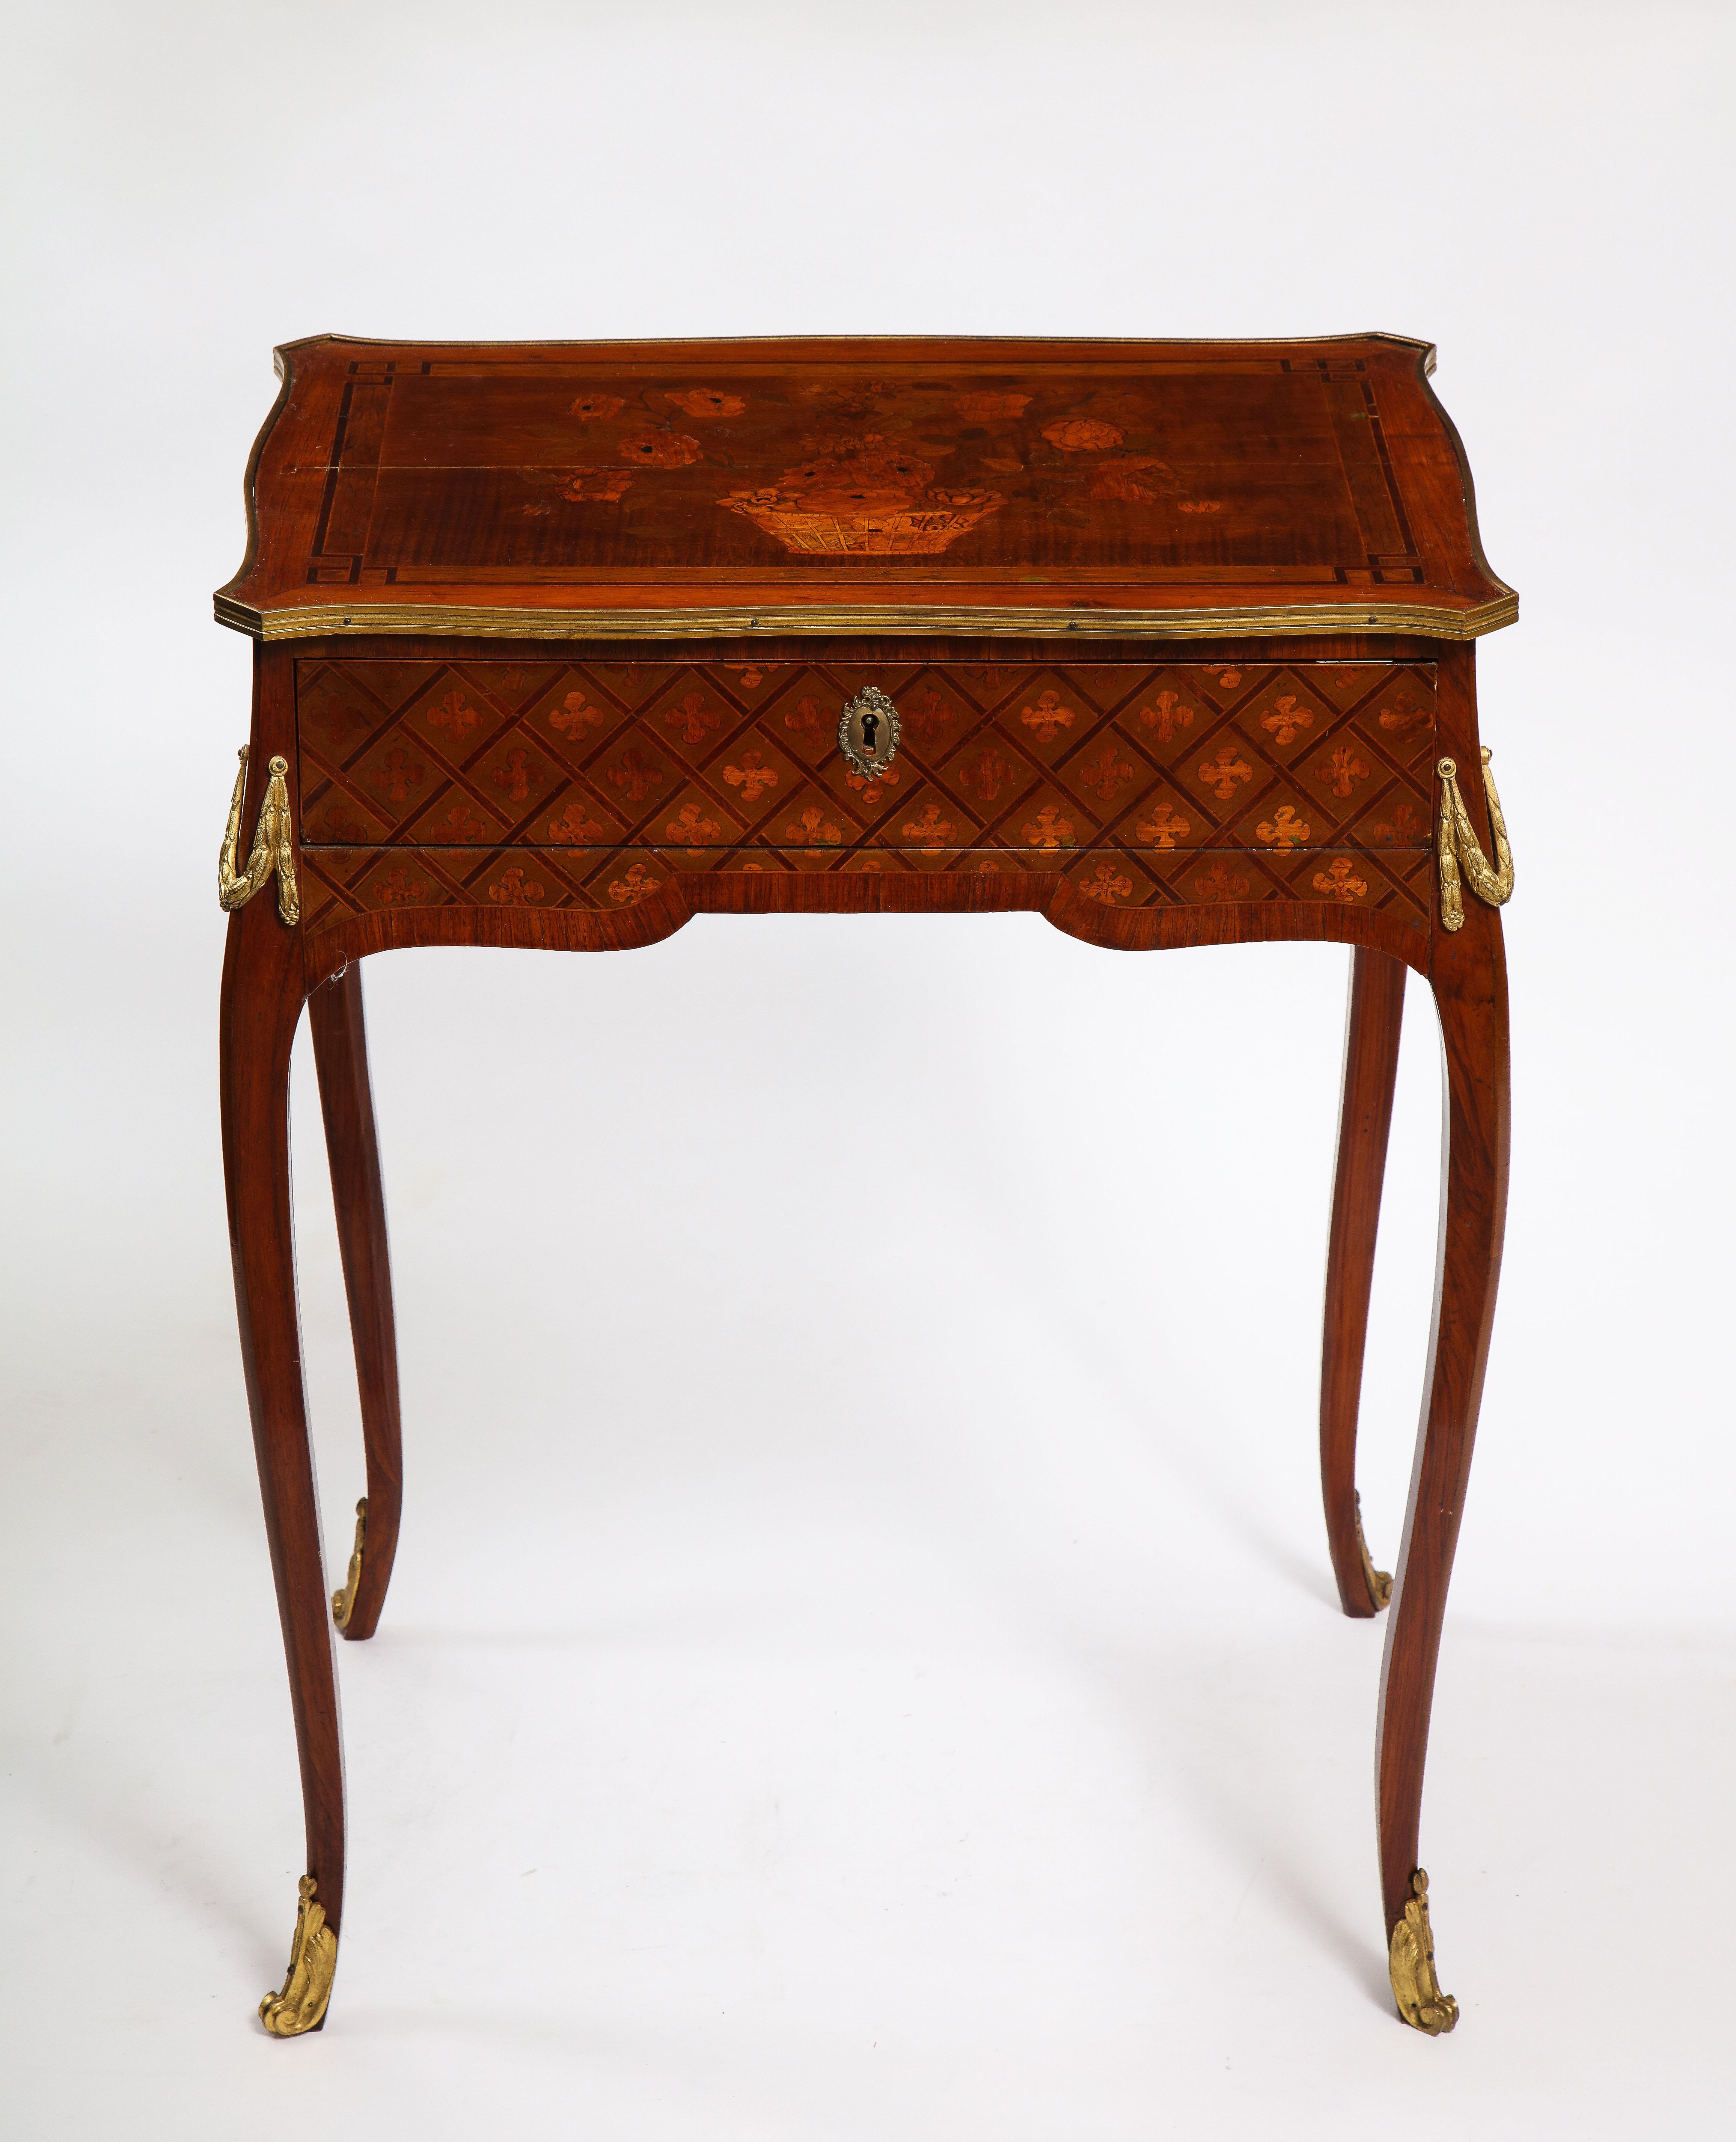 A gorgeous French Louis XVI period dore bronze mounted marquetry and parquetry side table. Each piece of this side table is beautifully hand-cut and fitted with a beautiful geometric parquetry design of prismatic pieces of light and dark hard-wood.